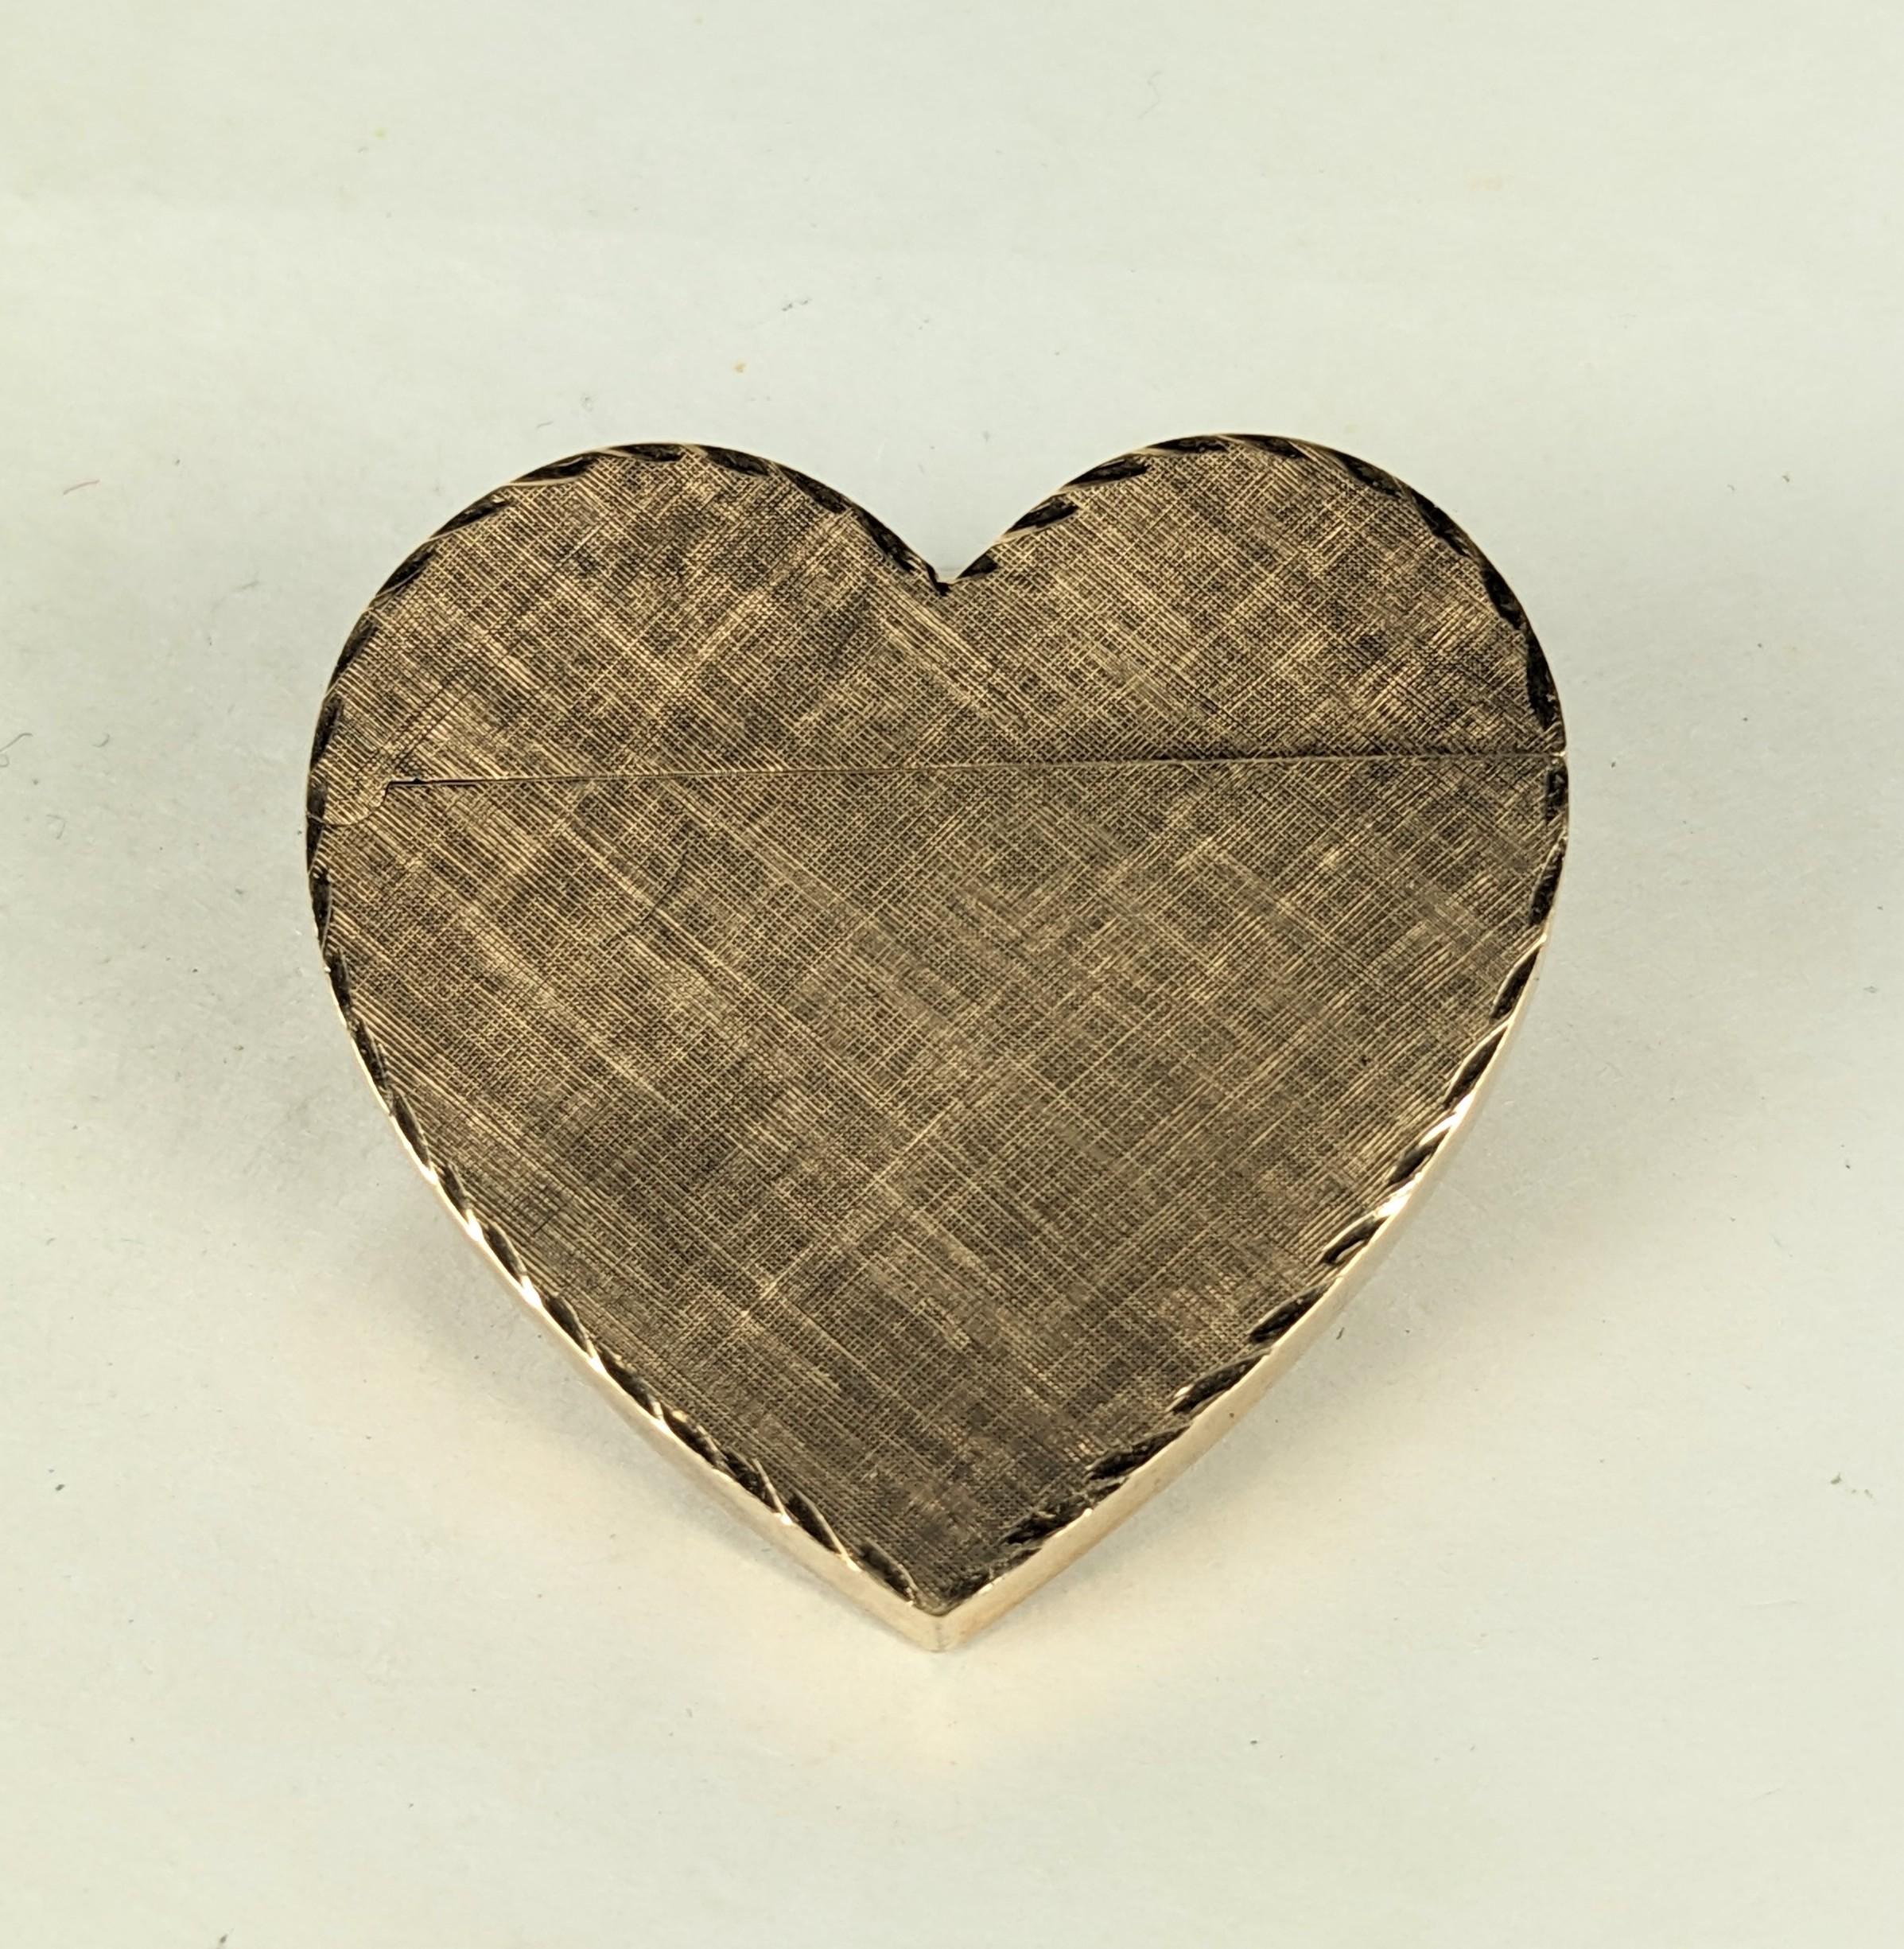 Charming Textured 14k Gold Heart Form Lighter from the 1960's. Unsigned but tested as 14k gold. 1960's USA. 1.5